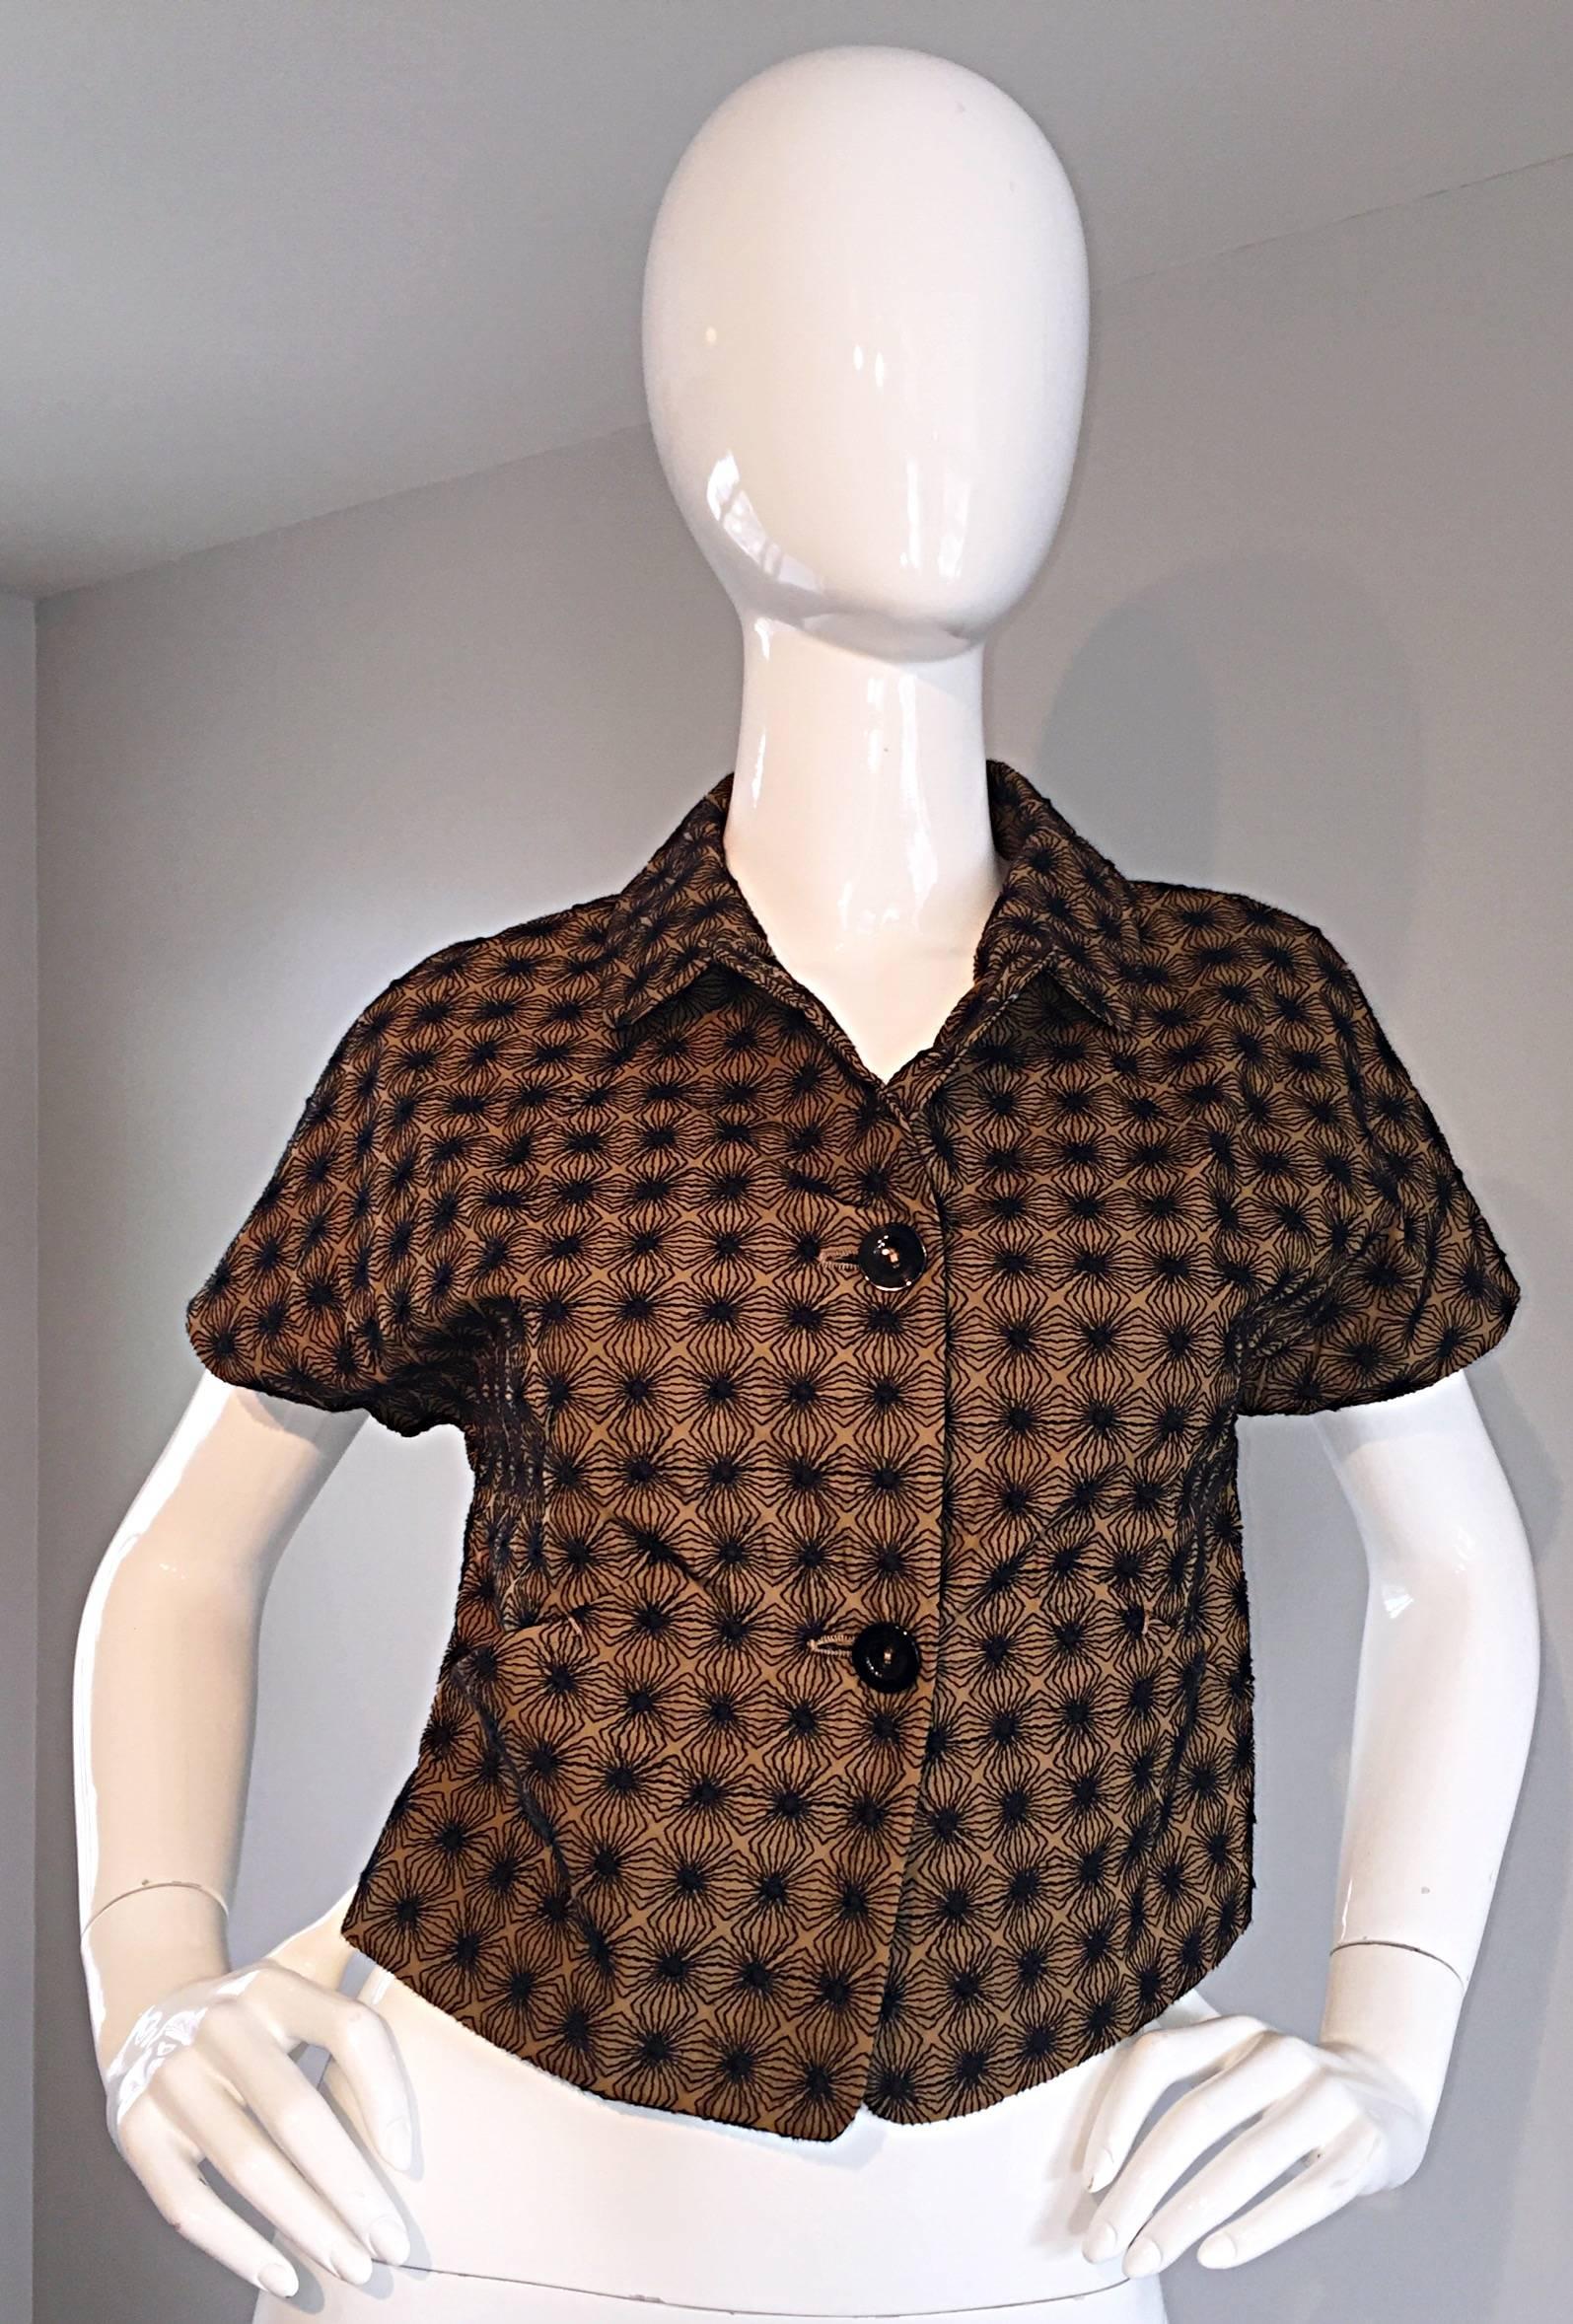 Wonderful brand new PIAZZA SEMPIONE cropped cotton short sleeve jacket! 1940s style, that looks awesome casual, or dressy. Black embroidery over brown cotton. Pockets at both sides of the waist. Great with jeans, trouser, a skirt, or over a dress.